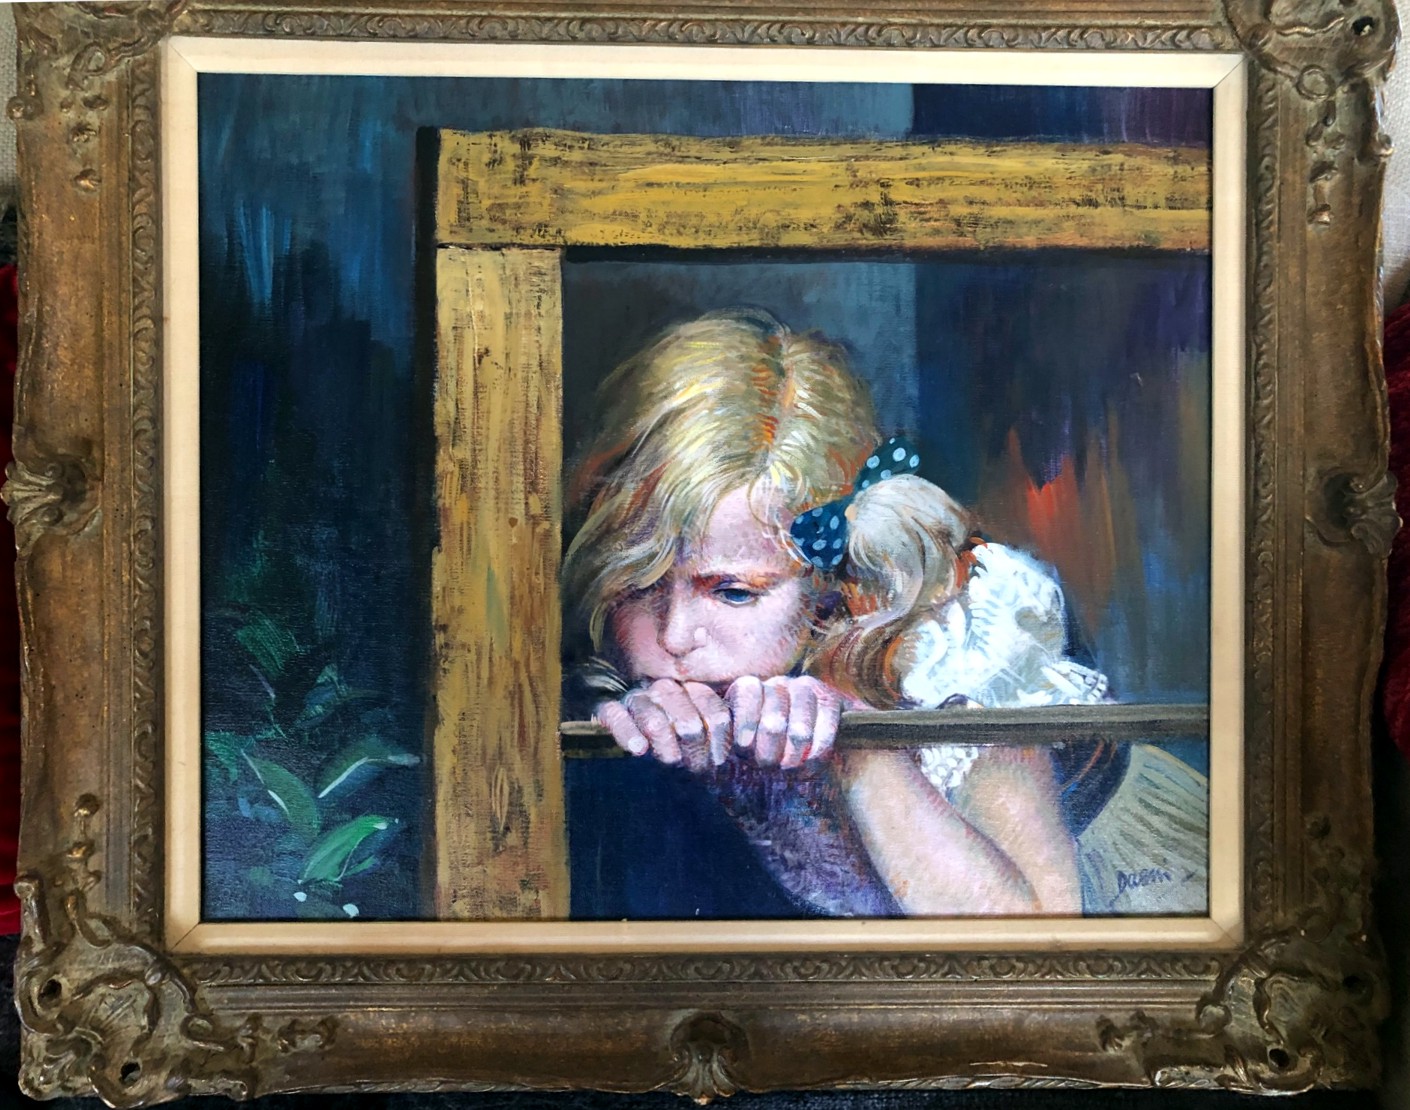 Girl in the Window by Pino, Original Painting, Oil on Canvas

Size: 28 x 20